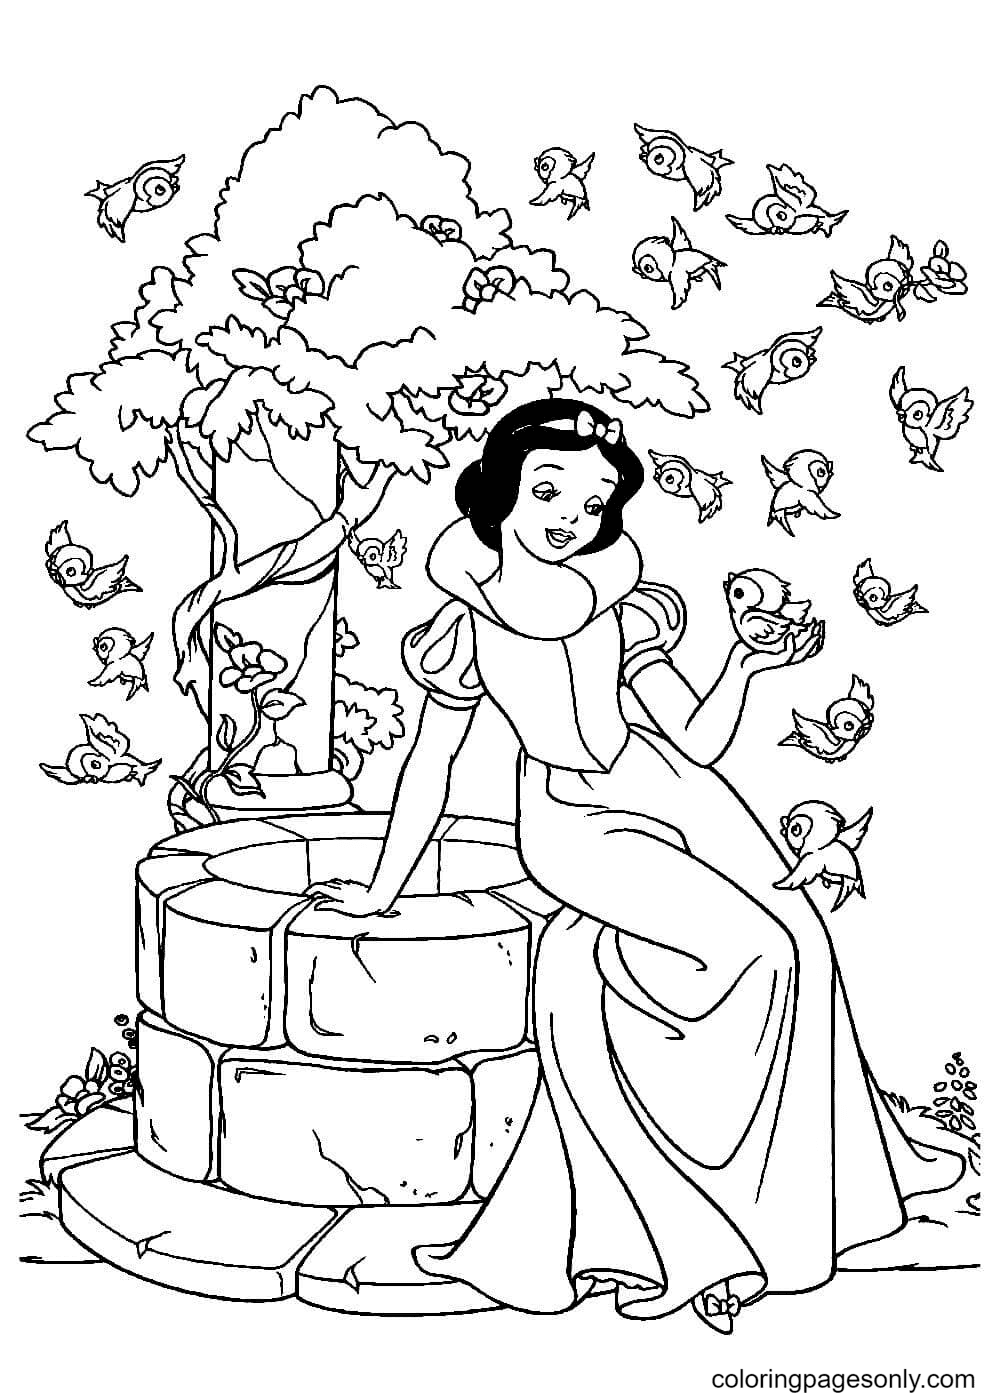 Snow White sings with a bird Coloring Page